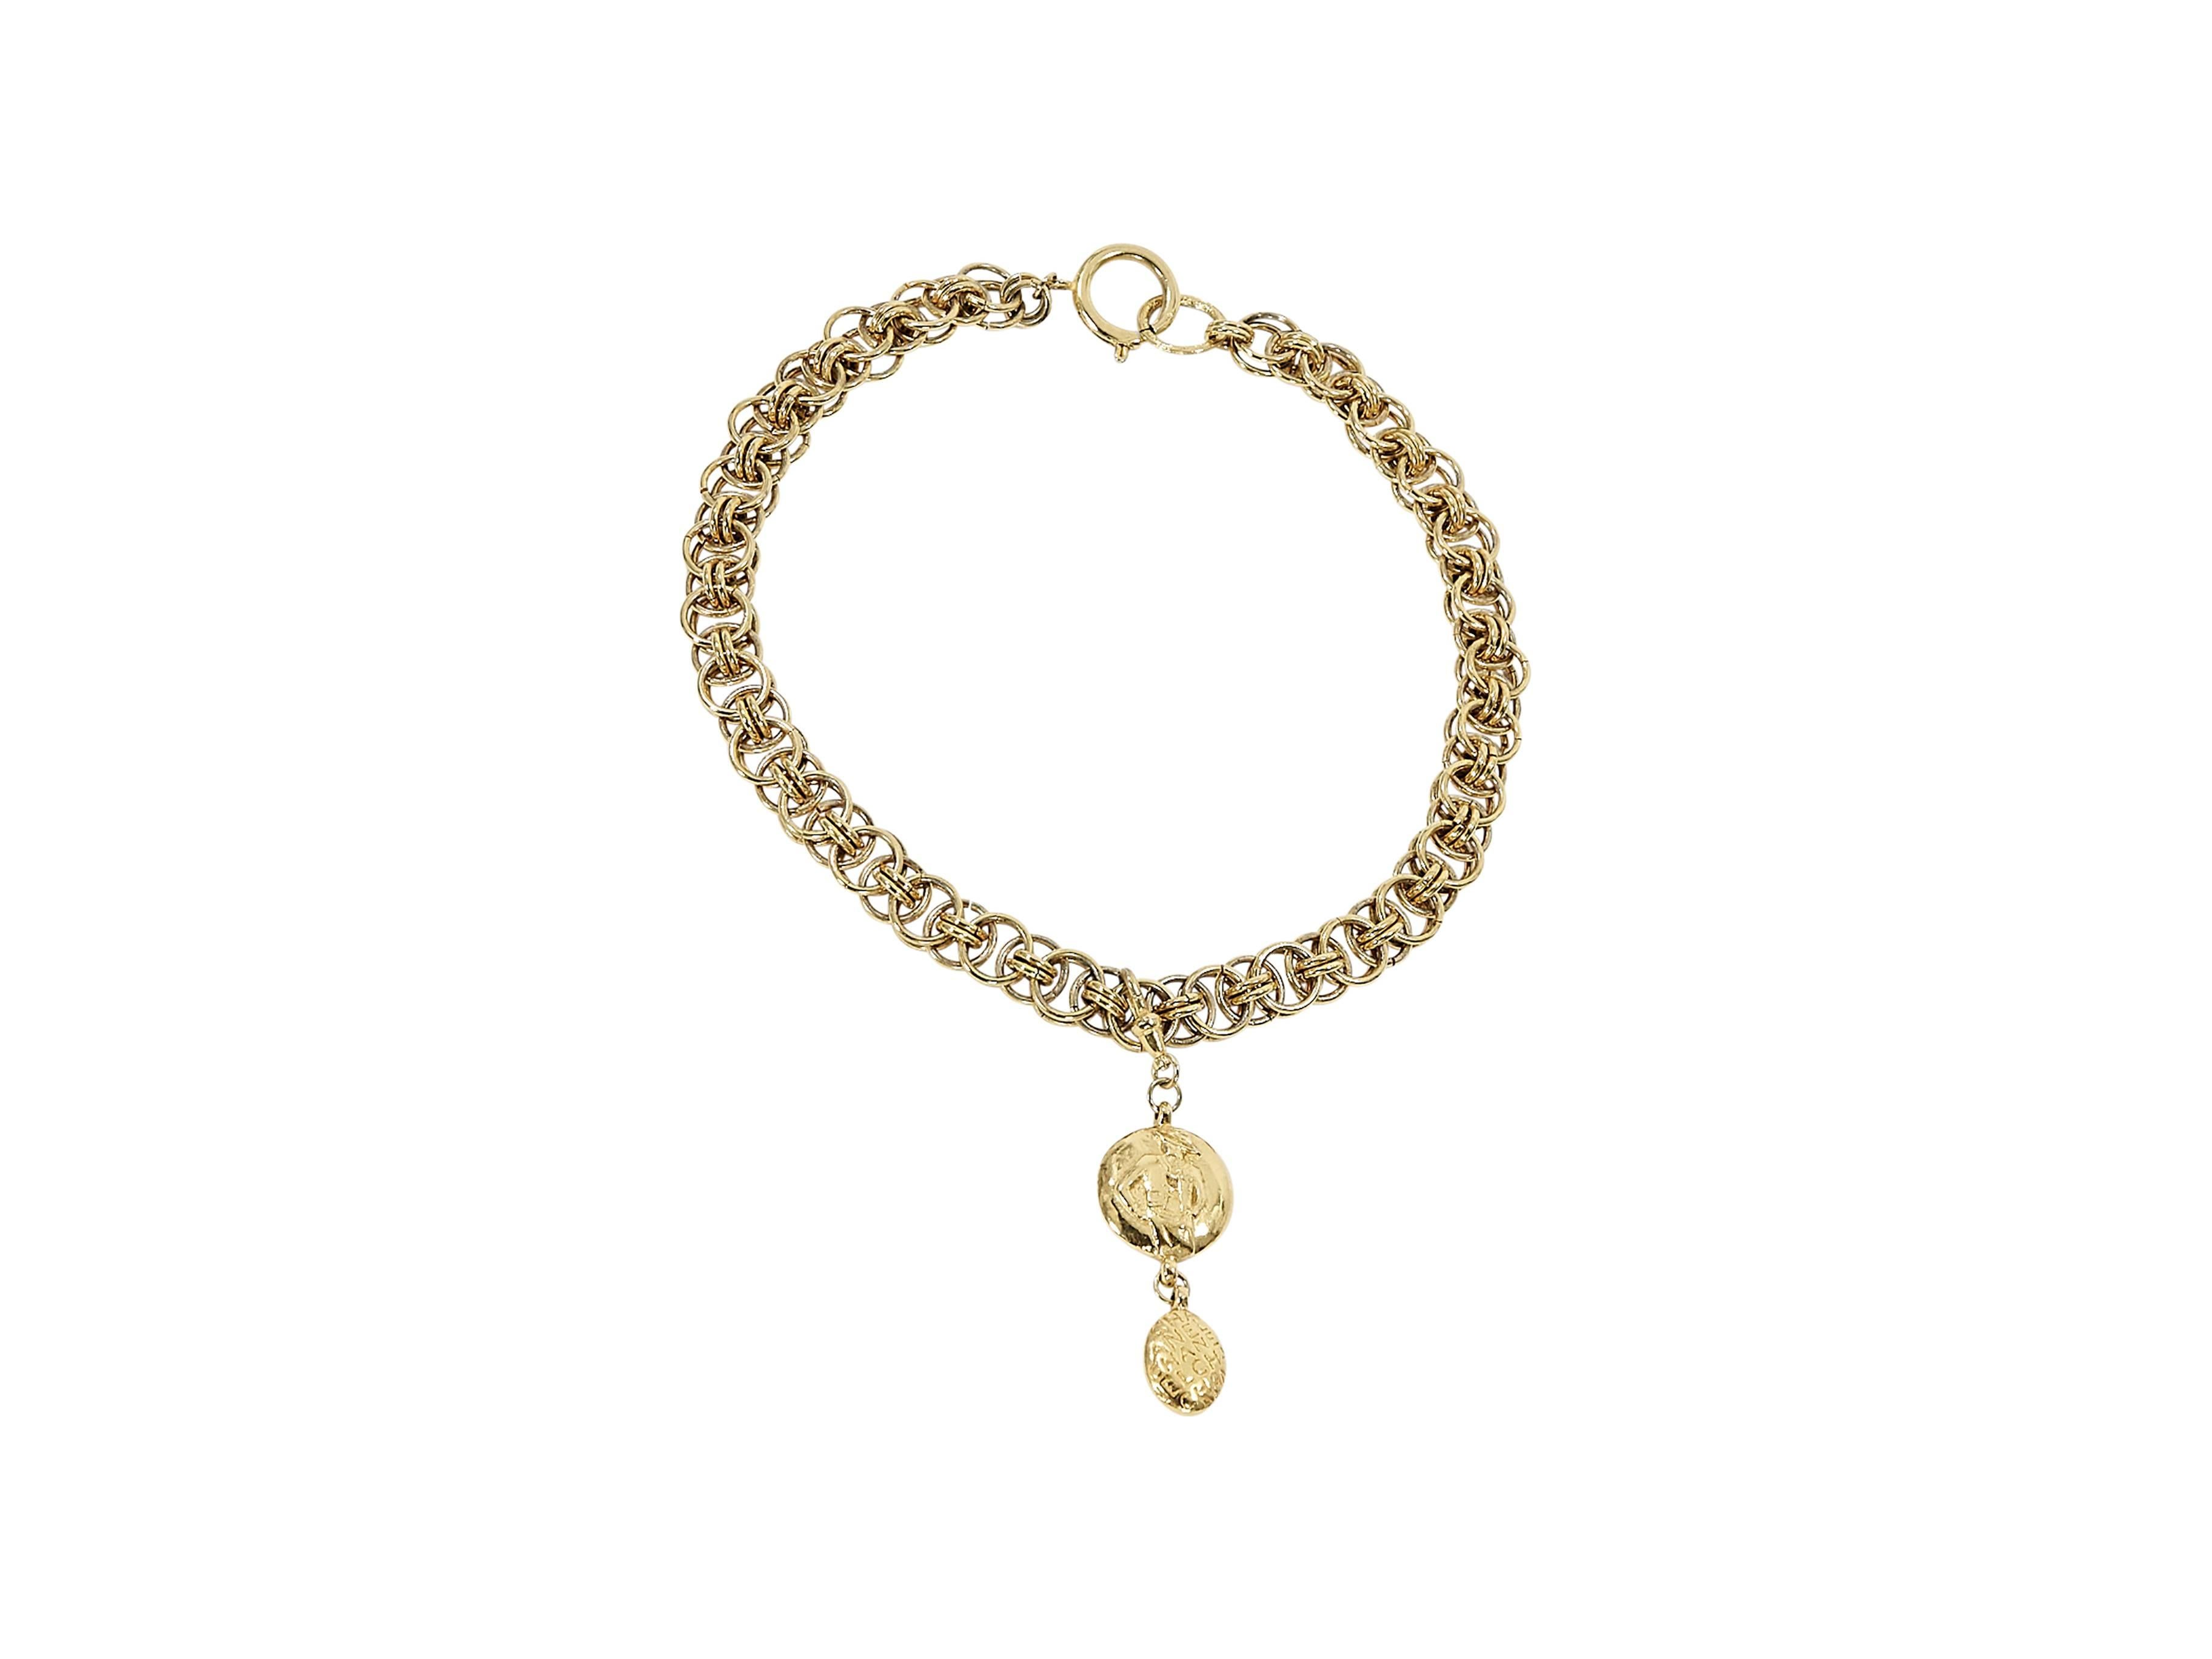 Product details:  Vintage goldtone pendant necklace by Chanel.  Spring ring closure.  16.5